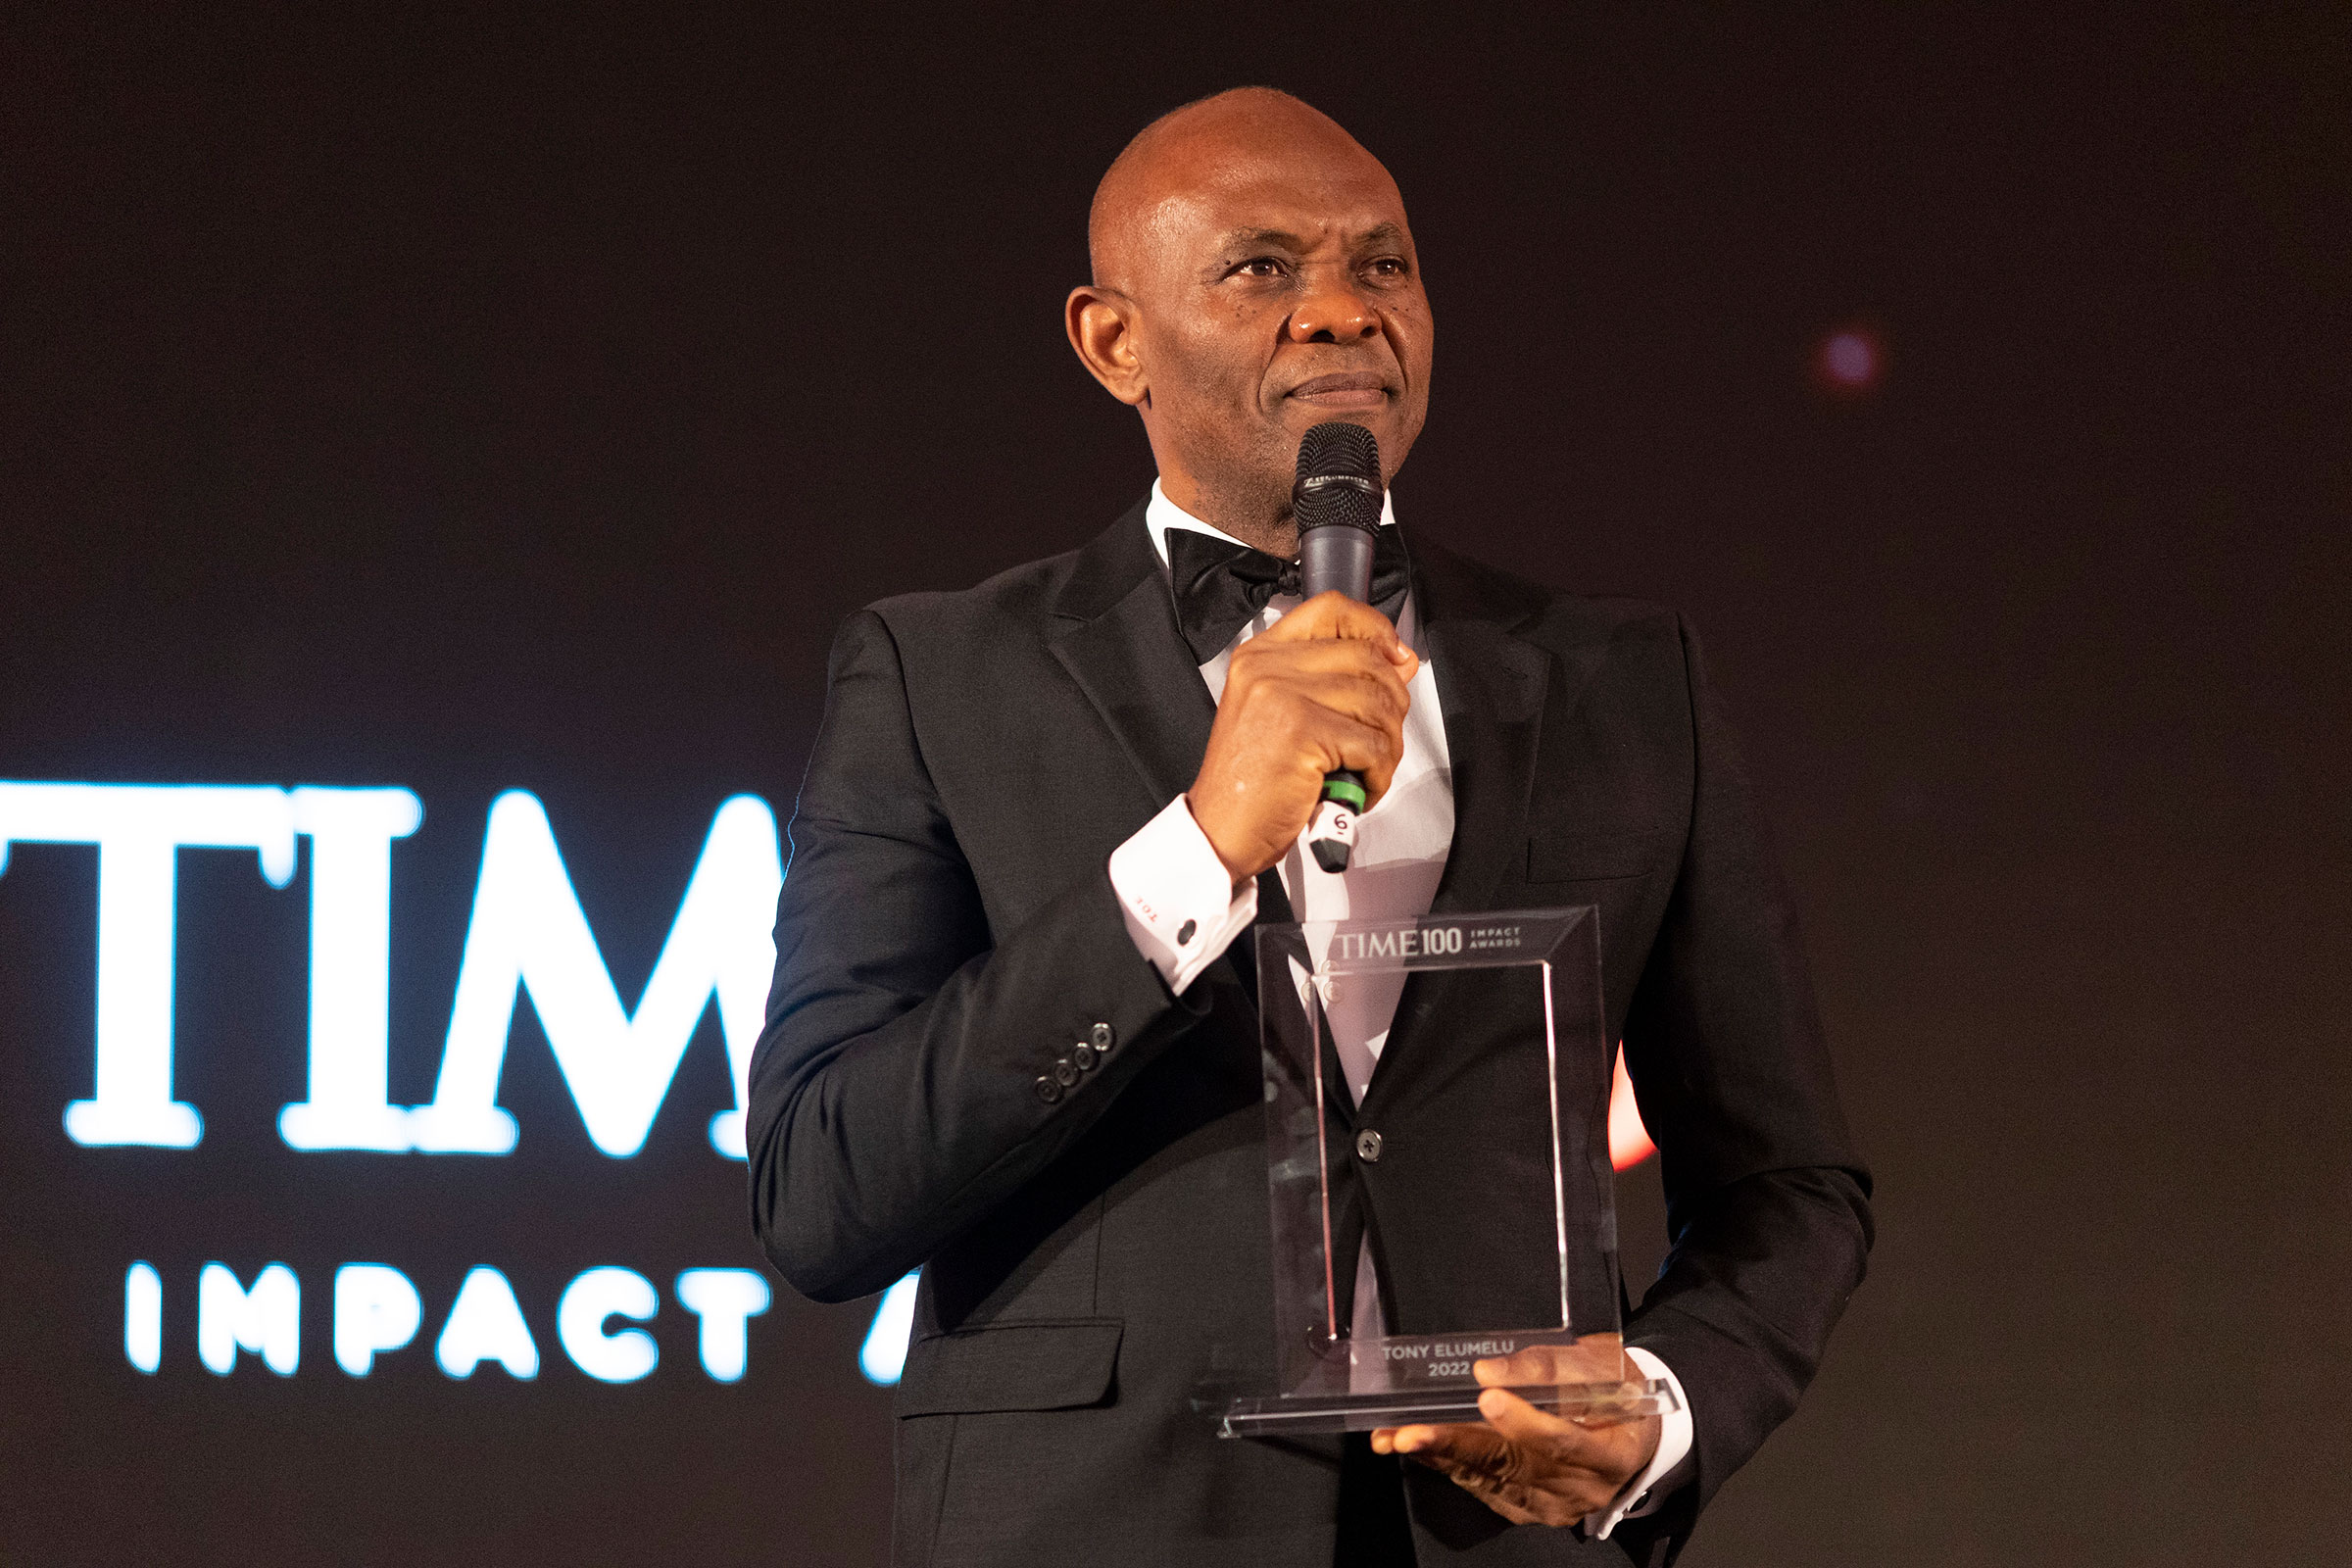 Tony Elumelu accepts the TIME 100 Impact Award at the Museum of the Future in Dubai on March 28, 2022. (Pause Films / Igor Moskalenko)